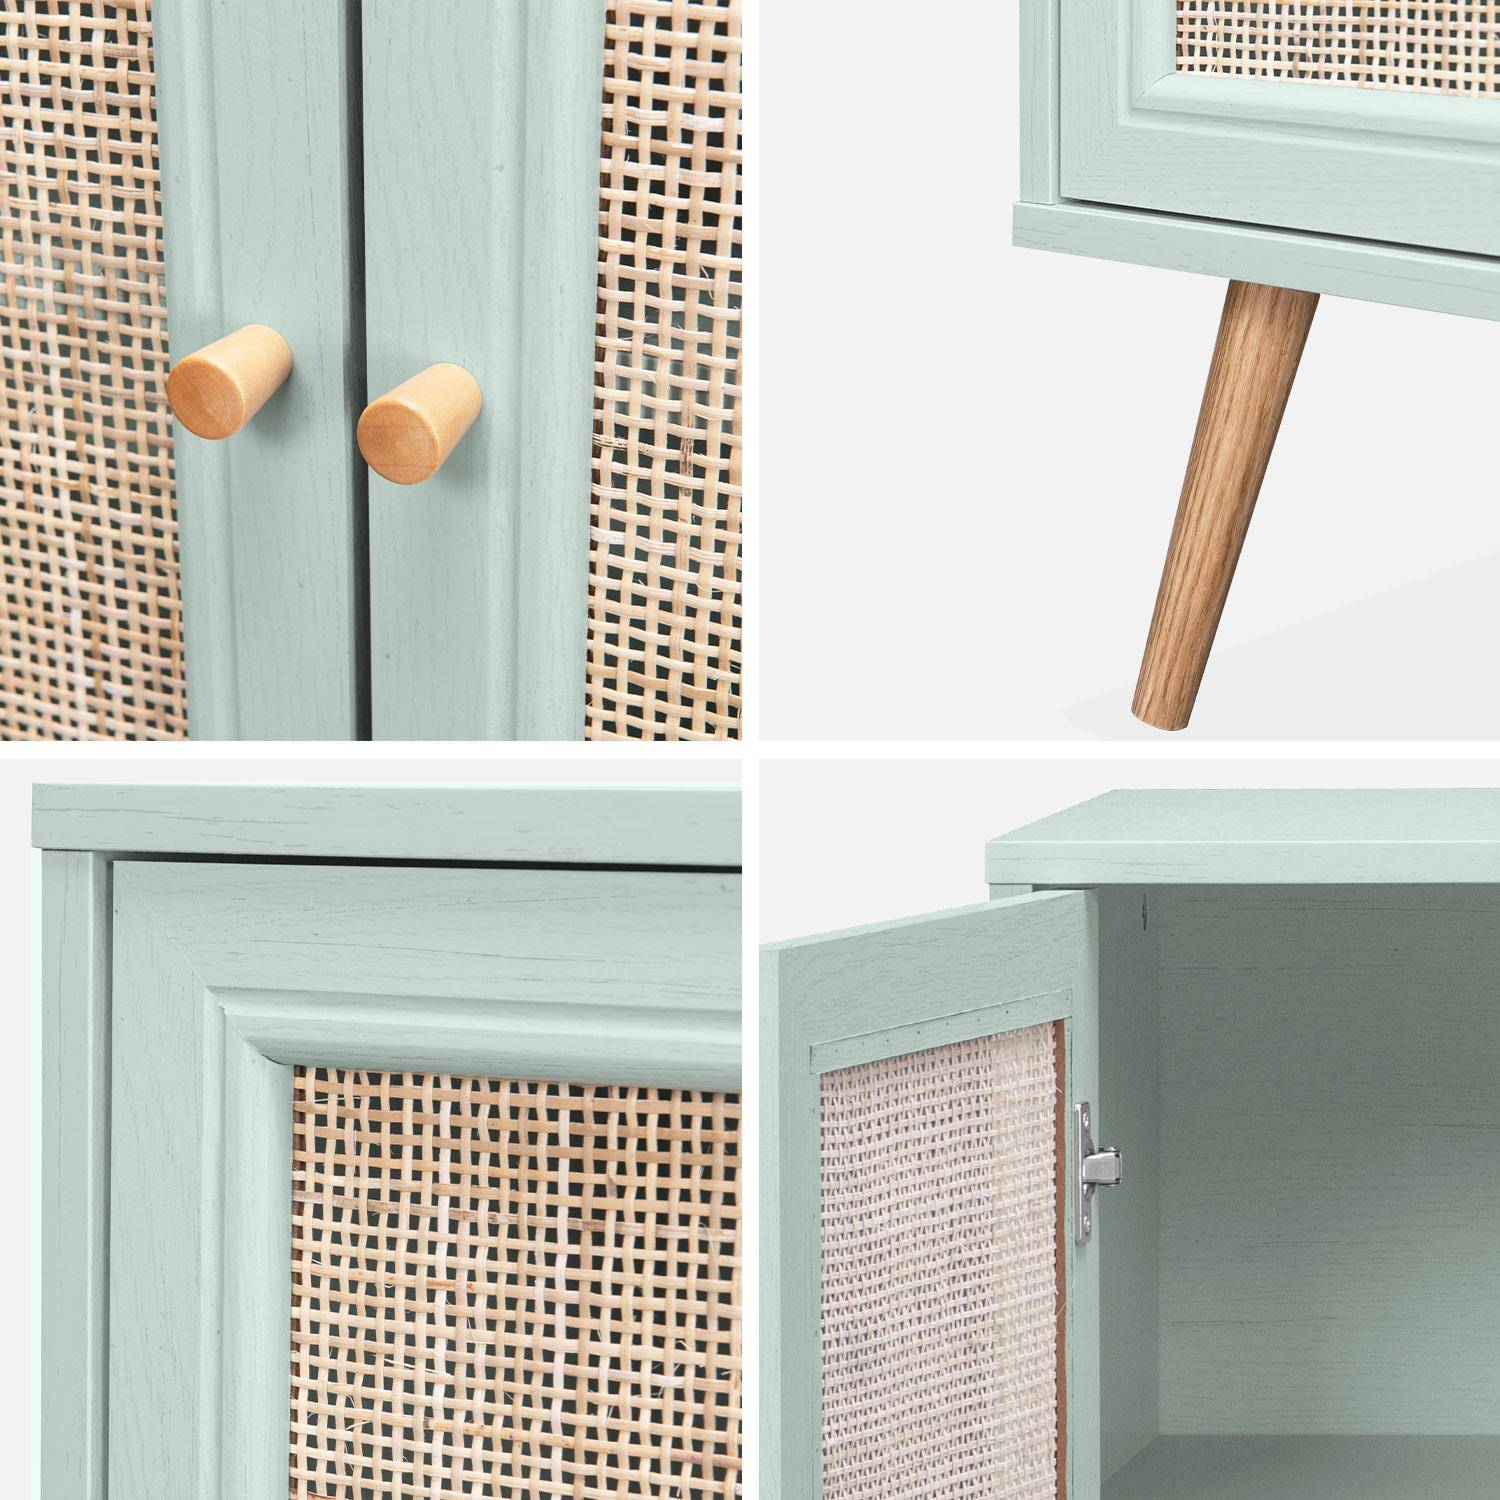 Wooden and cane rattan detail sideboard with 3 doors, 2 shelves, Scandi-style legs, 120x39x70cm - Boheme - Pastel Green,sweeek,Photo6